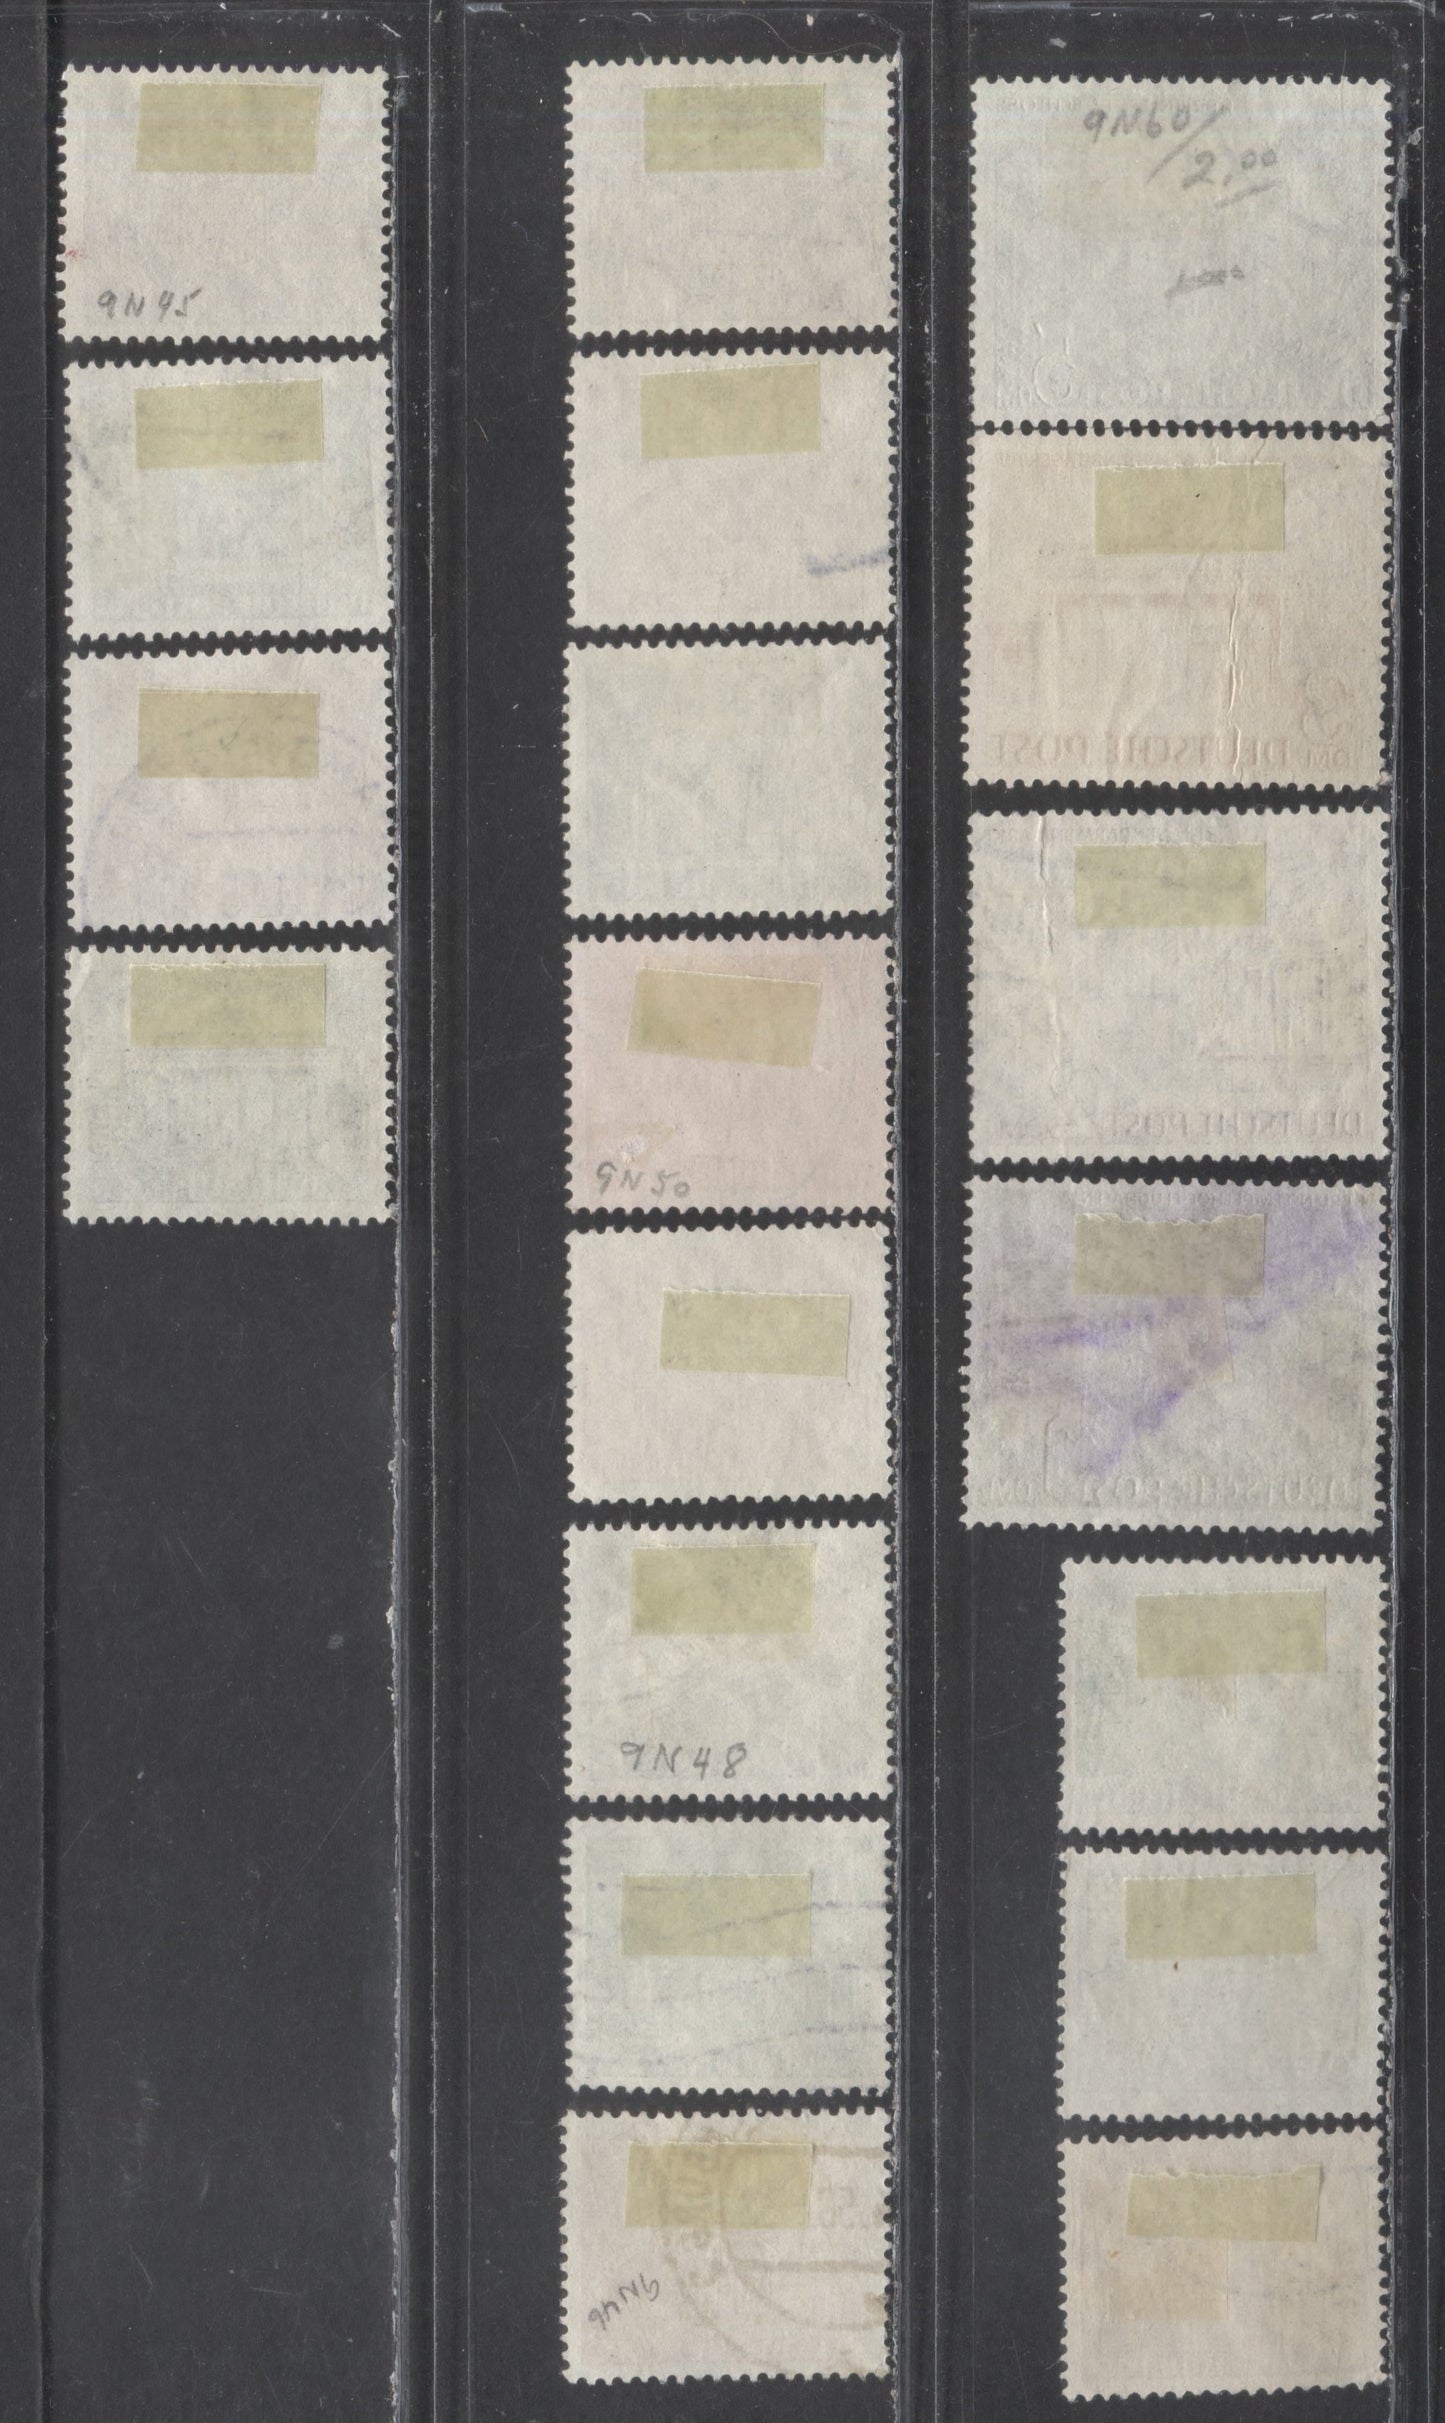 Lot 134 Germany - Berlin SC#9N42-9N60 1949 Definitives, 19 Fine/Very Fine Used Singles, Click on Listing to See ALL Pictures, 2017 Scott Cat. $42.2 USD